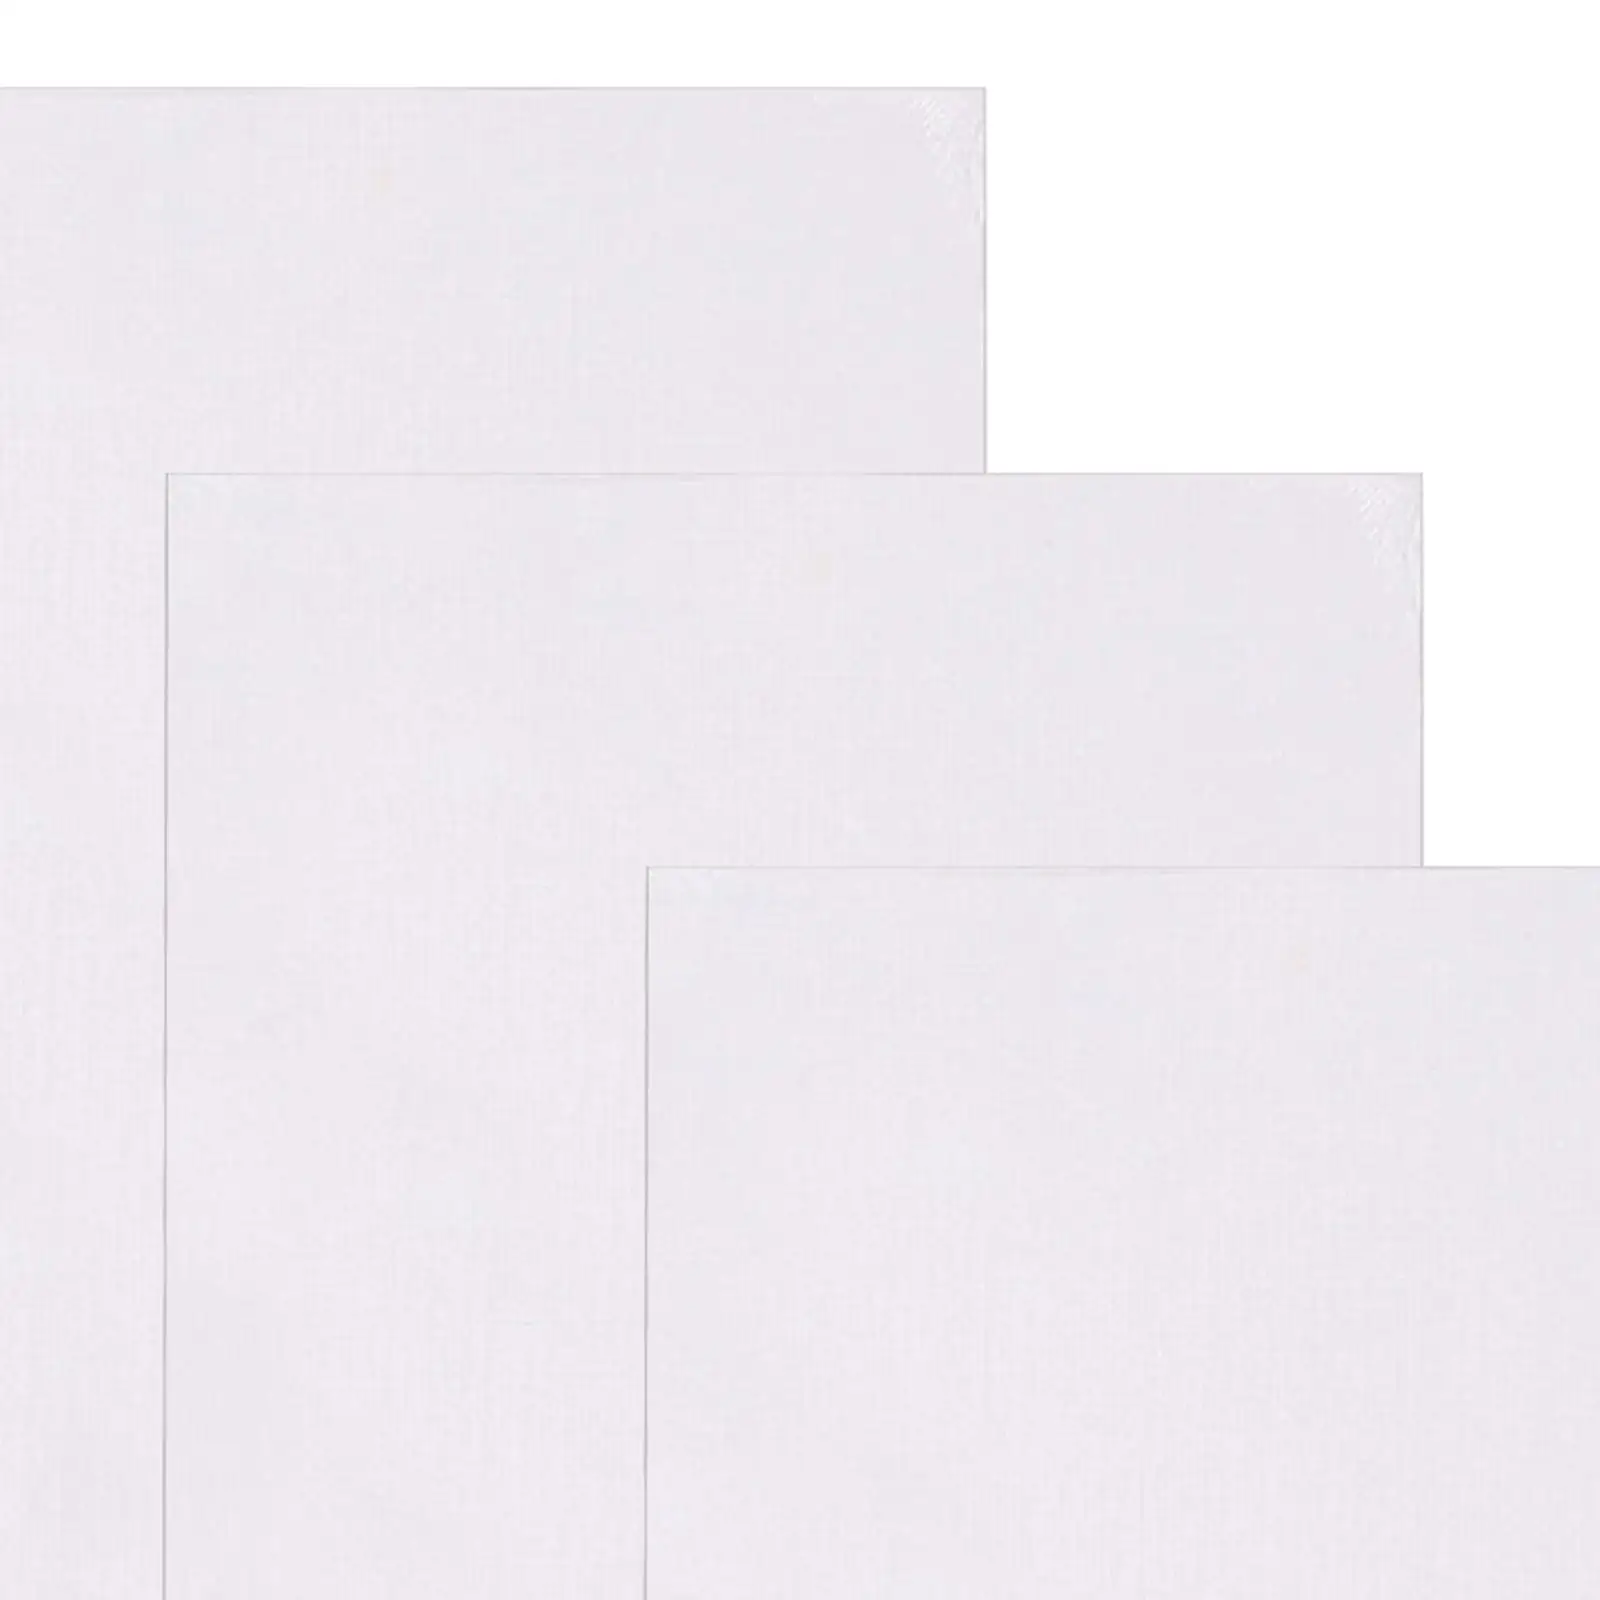 3x Cotton Artist Blank Canvas Boards Acrylic Oil Painting DIY Art Supplies Canvas Panels Primed for Acrylic Painting Adults Kids